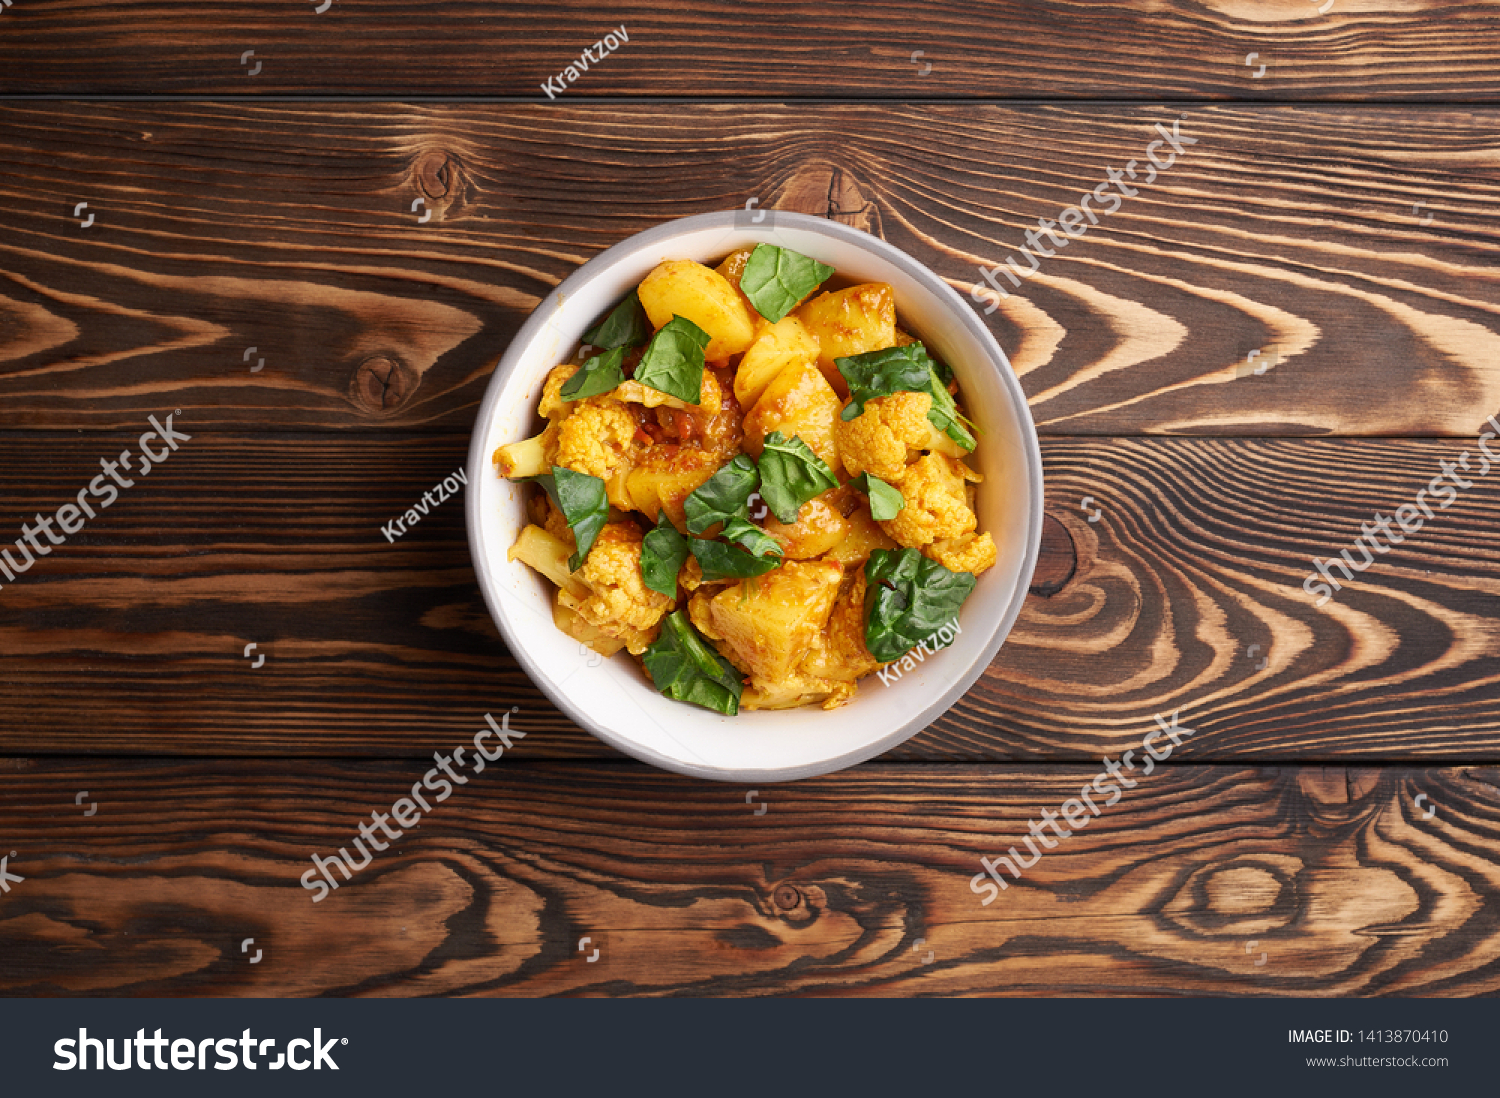 aloo gobi. Indian cuisine vegetarian curry cooked with cauliflower, potato, ginger, garlic and spices - cumin, coriander, chili and garam masala. brown woden table top #1413870410